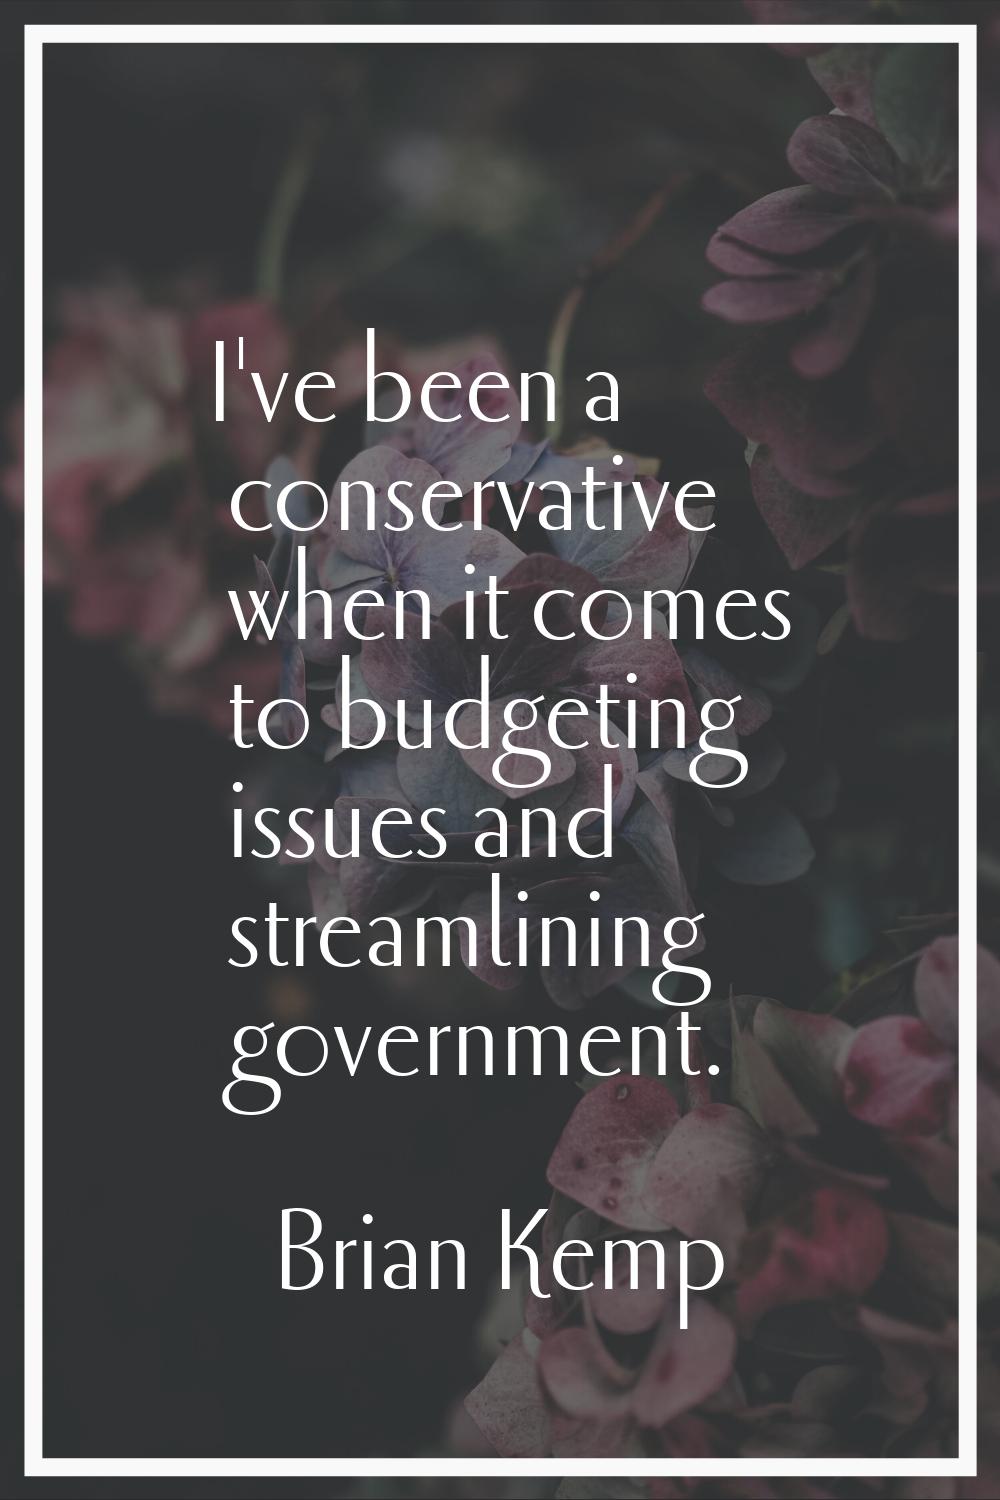 I've been a conservative when it comes to budgeting issues and streamlining government.